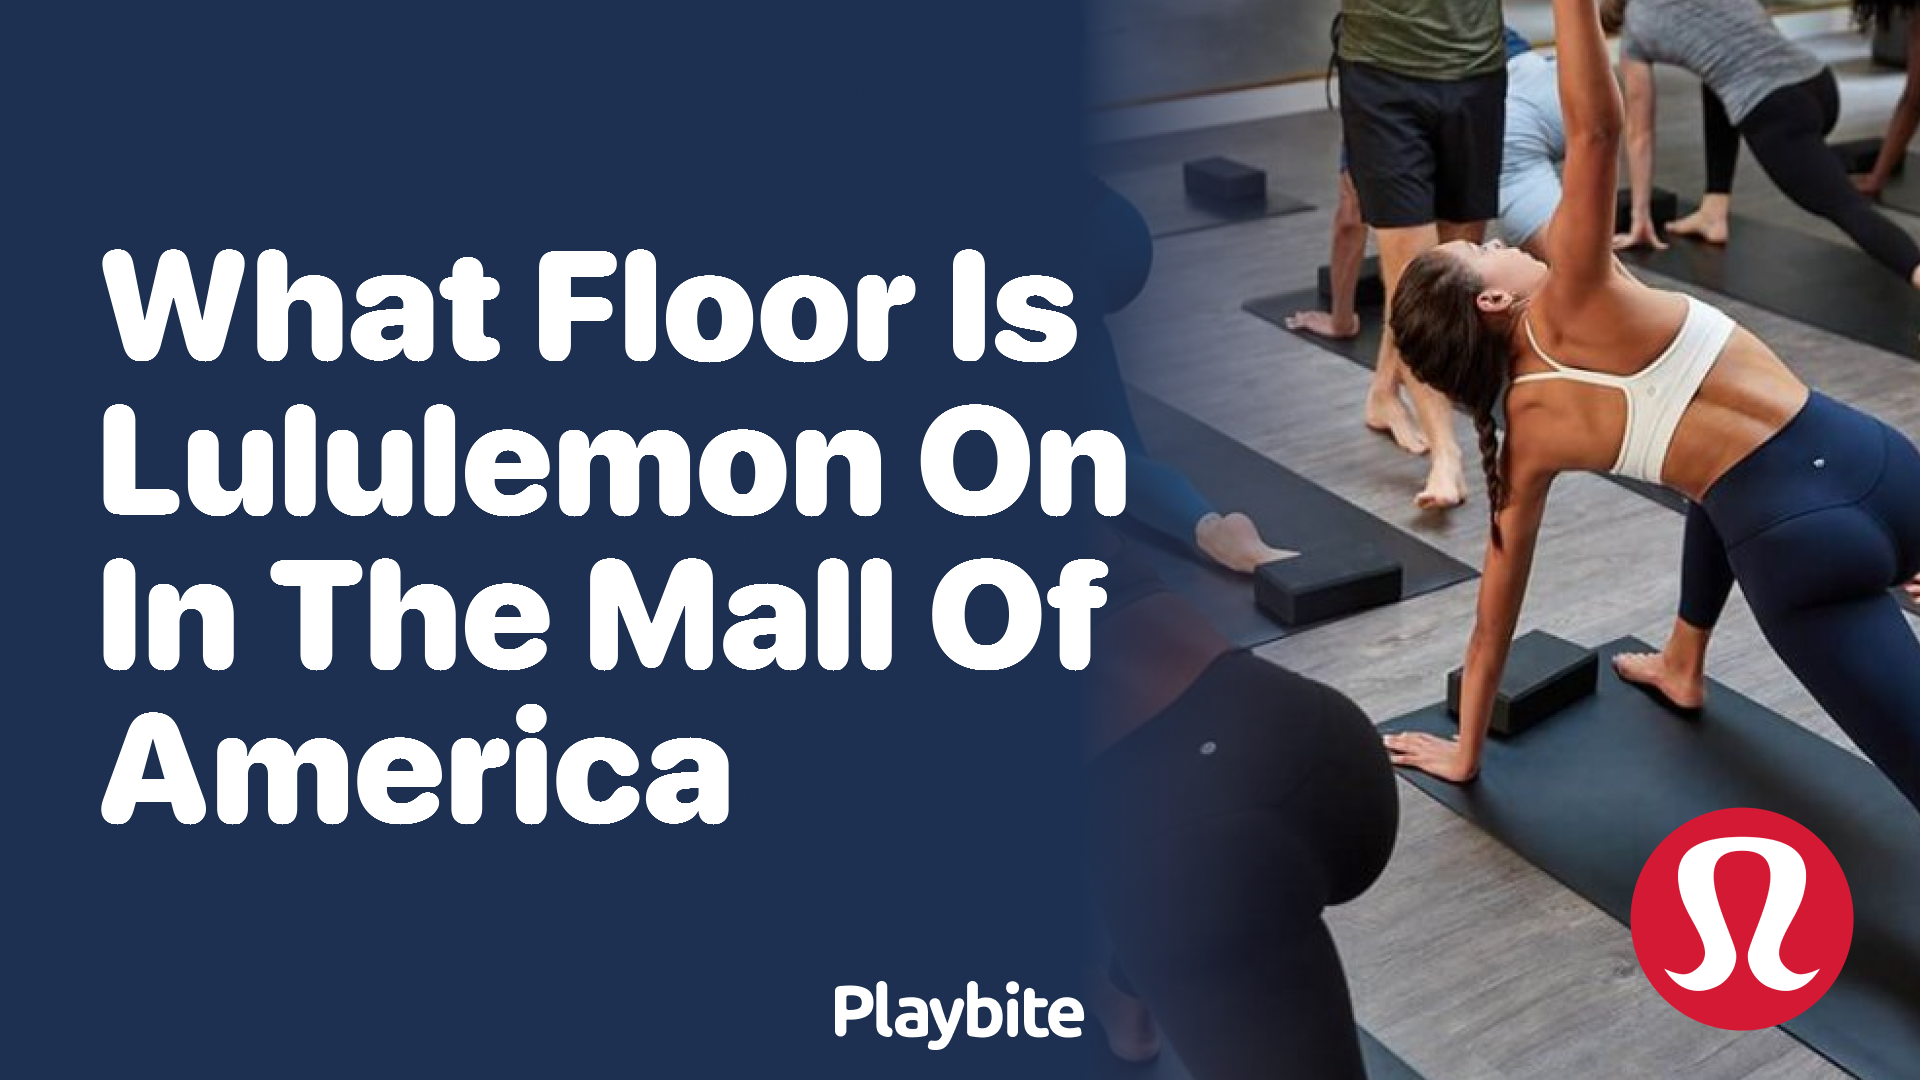 What Floor Is Lululemon On in the Mall of America? - Playbite